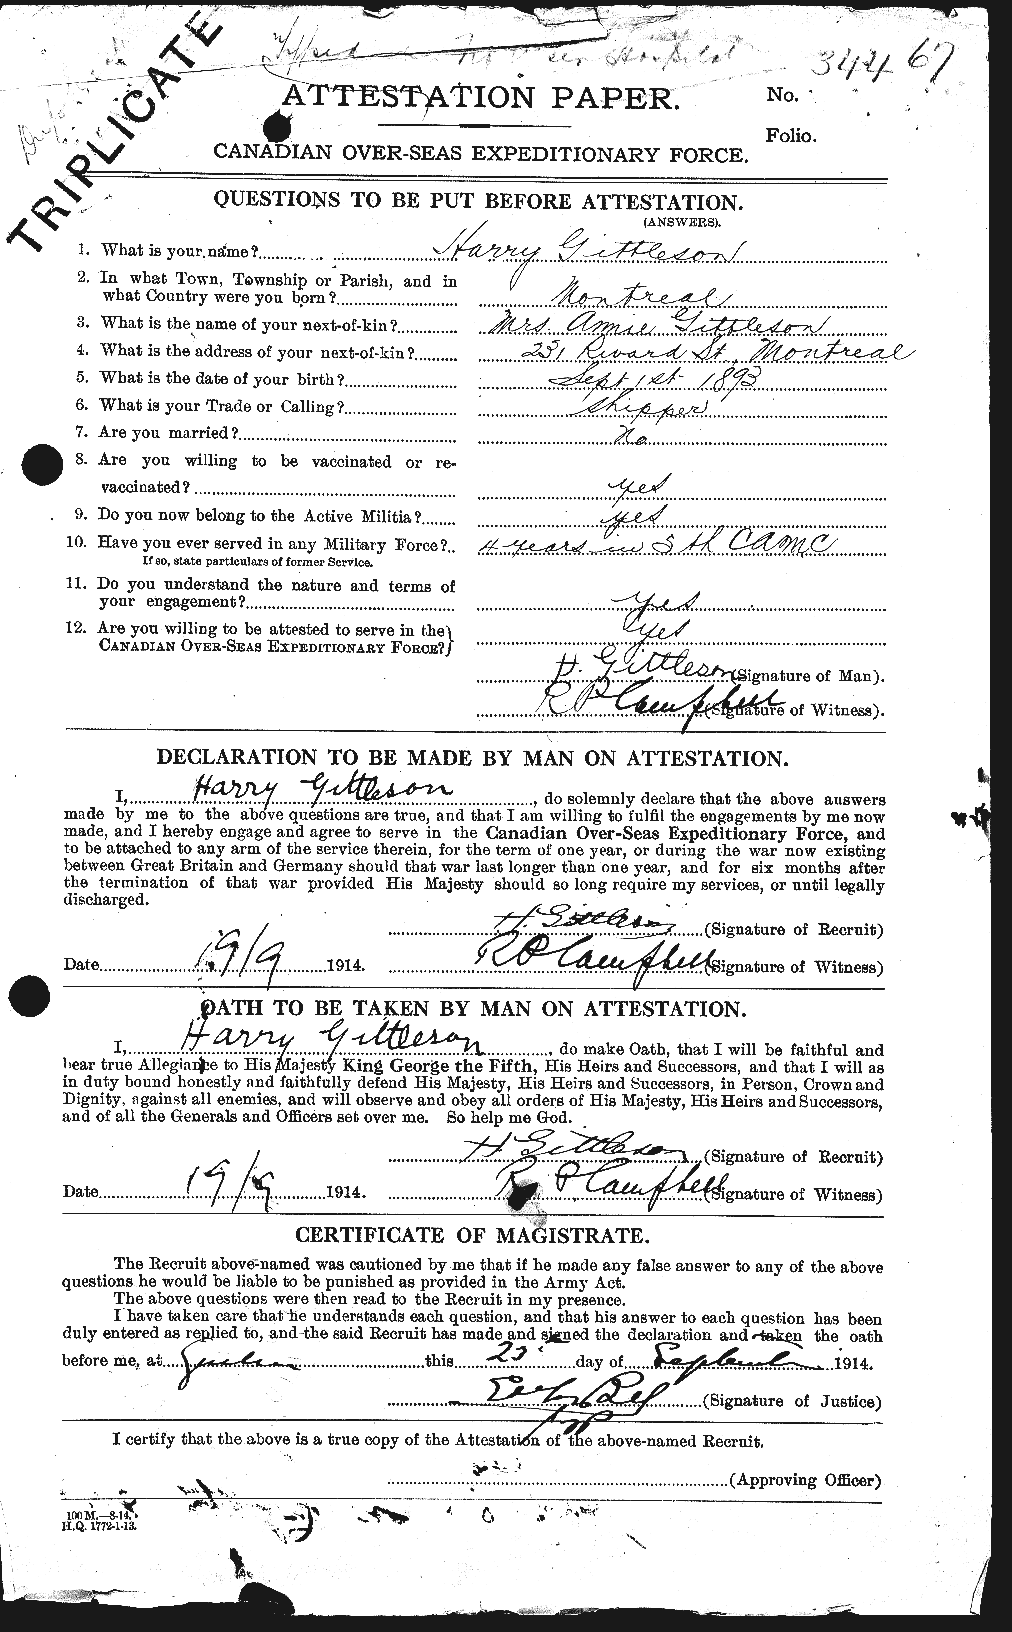 Personnel Records of the First World War - CEF 351402a